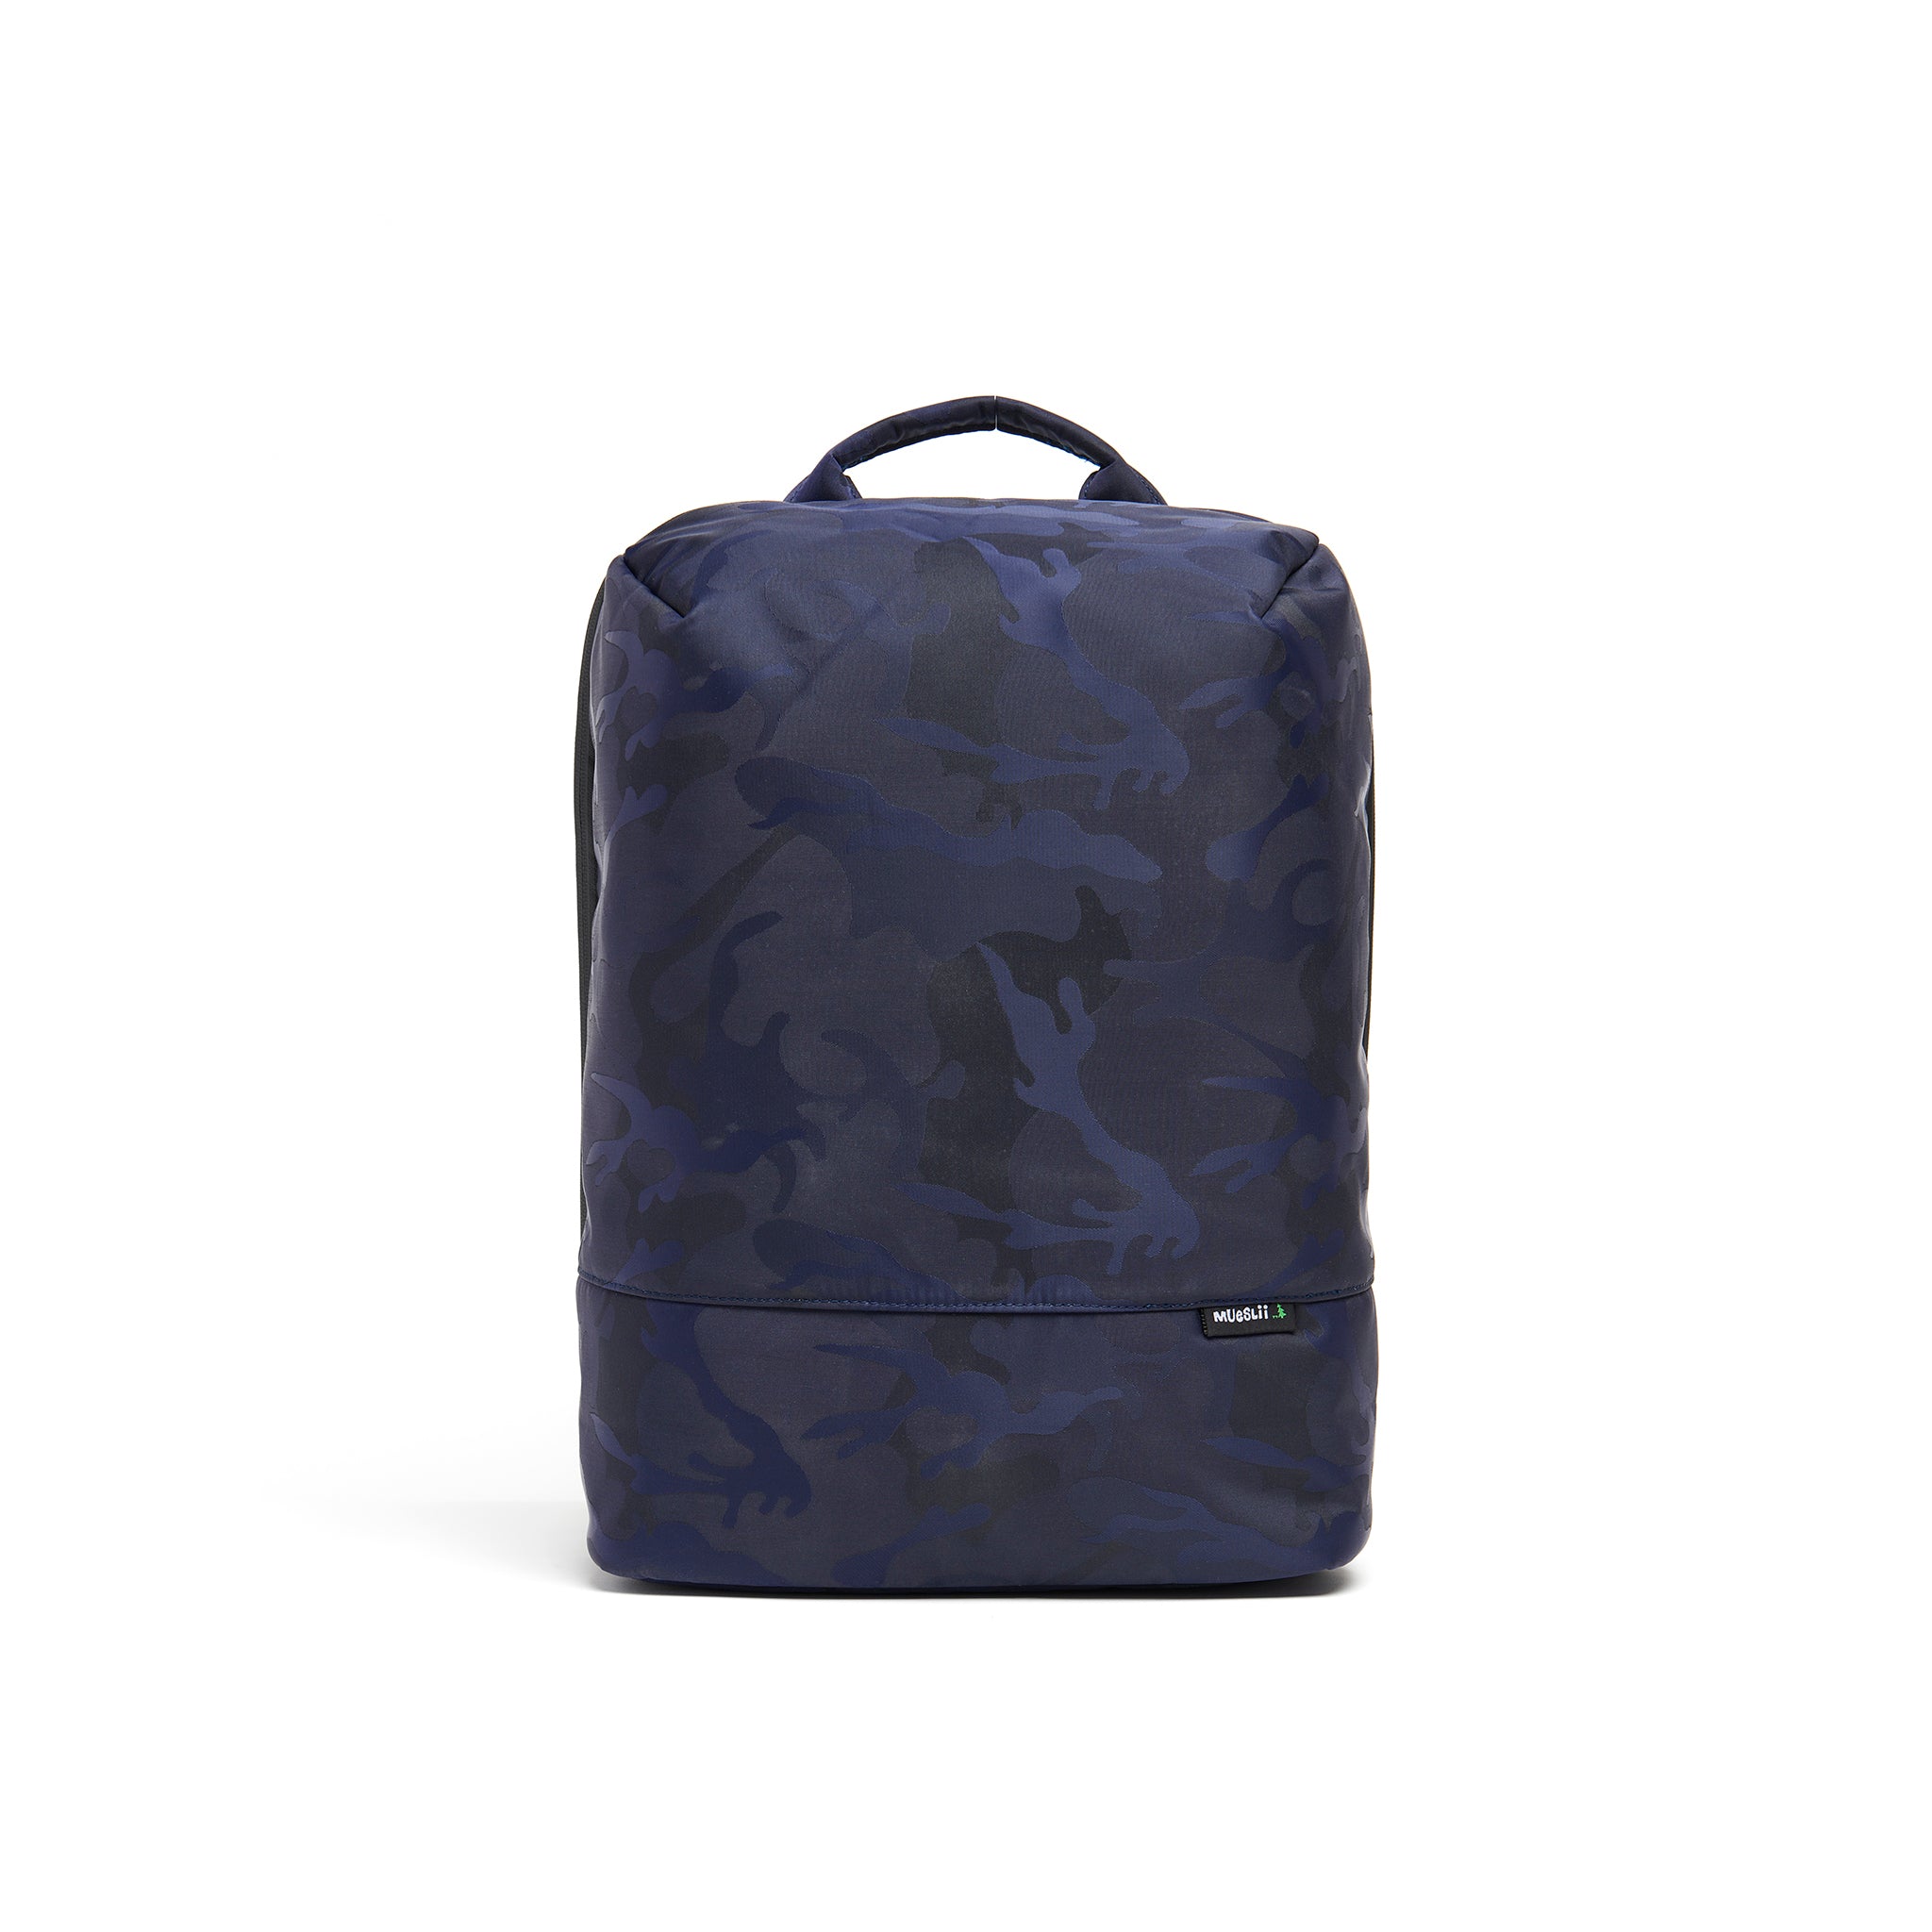 Mueslii travel backpack, made of waterproof jacquard nylon, camouflage pattern, with a laptop compartment, color blue, front view.